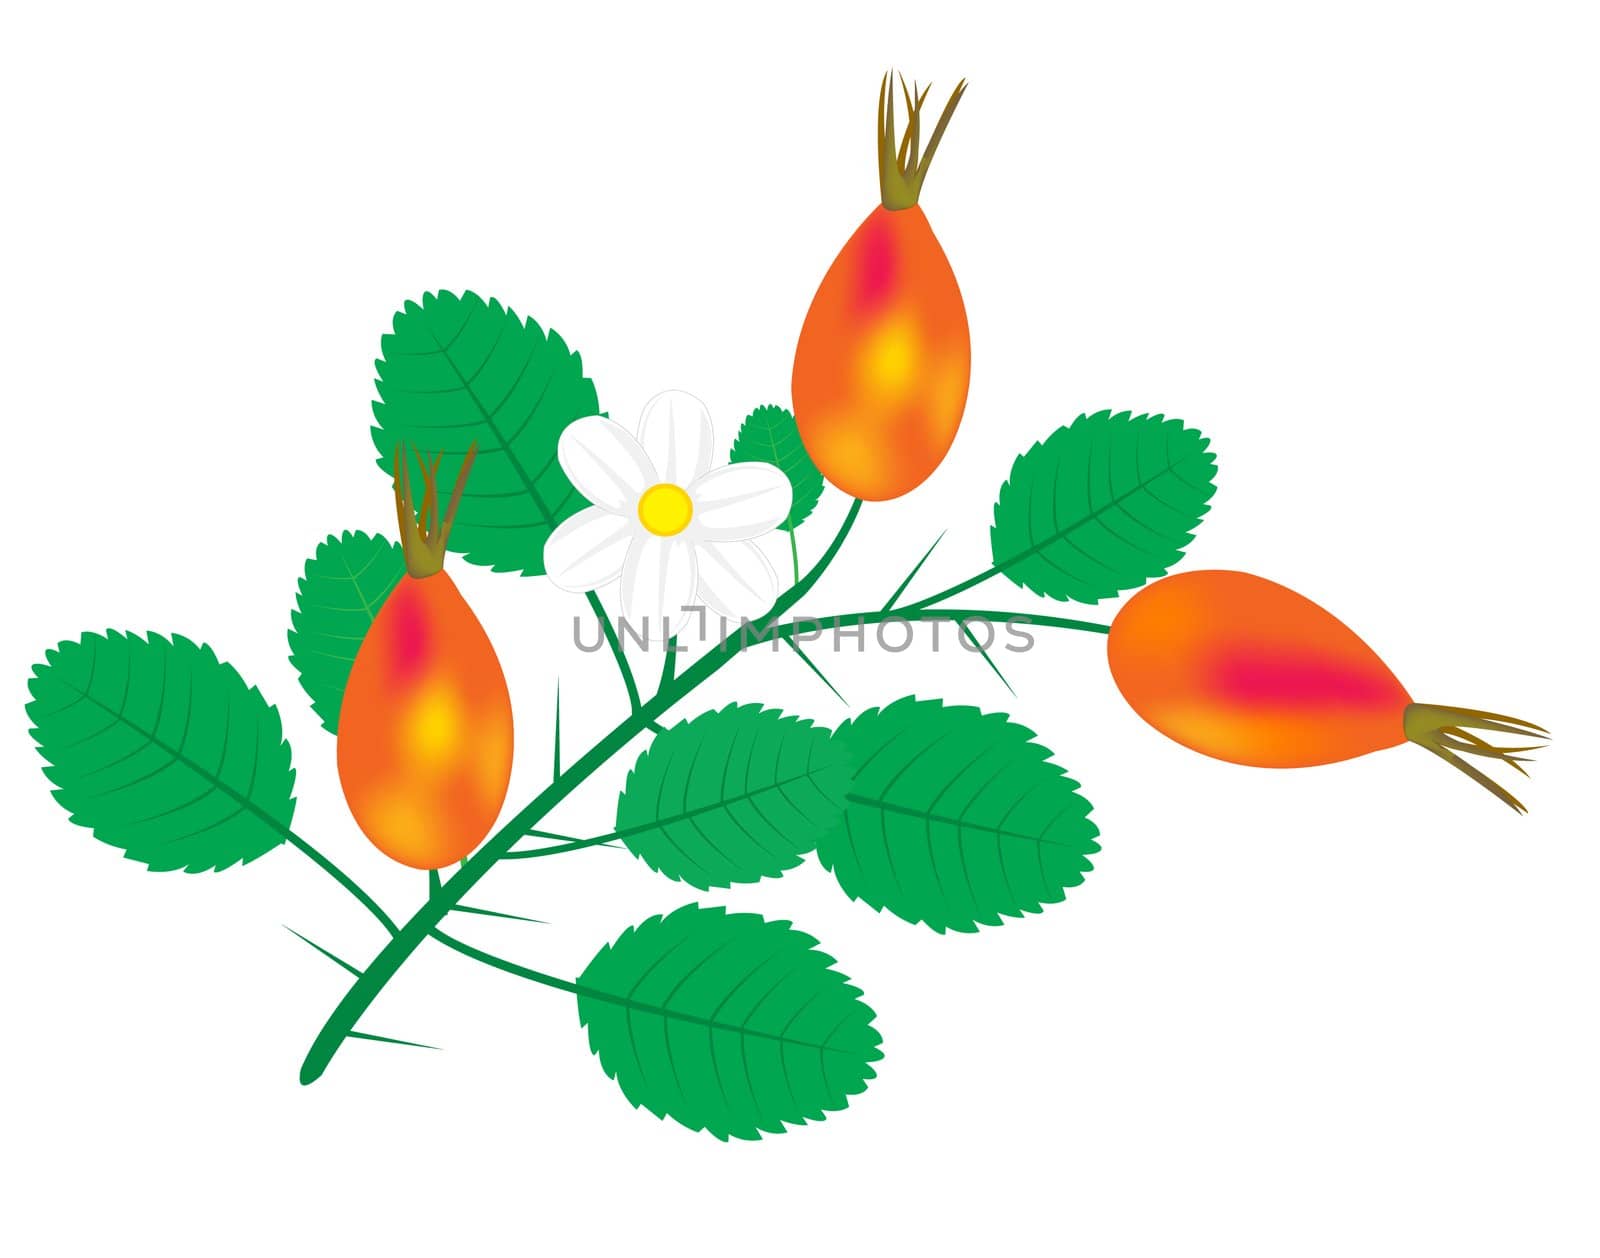 Illustration of the branch of the wild rose on white background